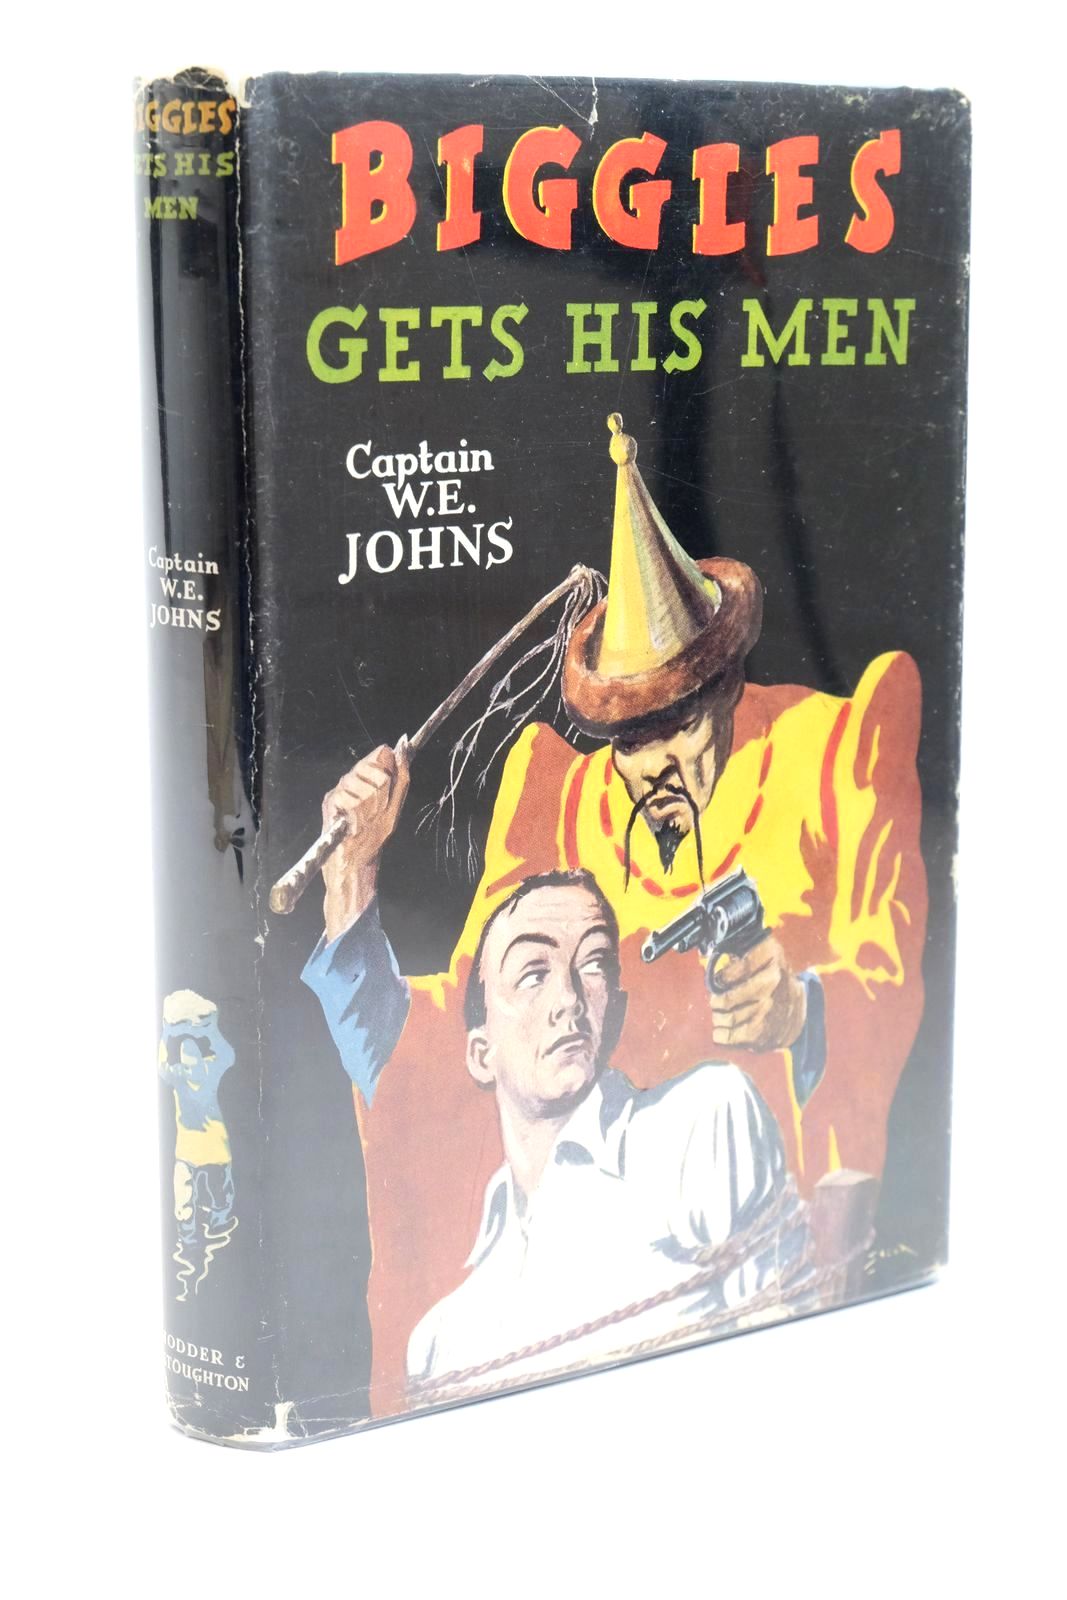 Photo of BIGGLES GETS HIS MEN written by Johns, W.E. illustrated by Stead,  published by Hodder &amp; Stoughton (STOCK CODE: 1323254)  for sale by Stella & Rose's Books